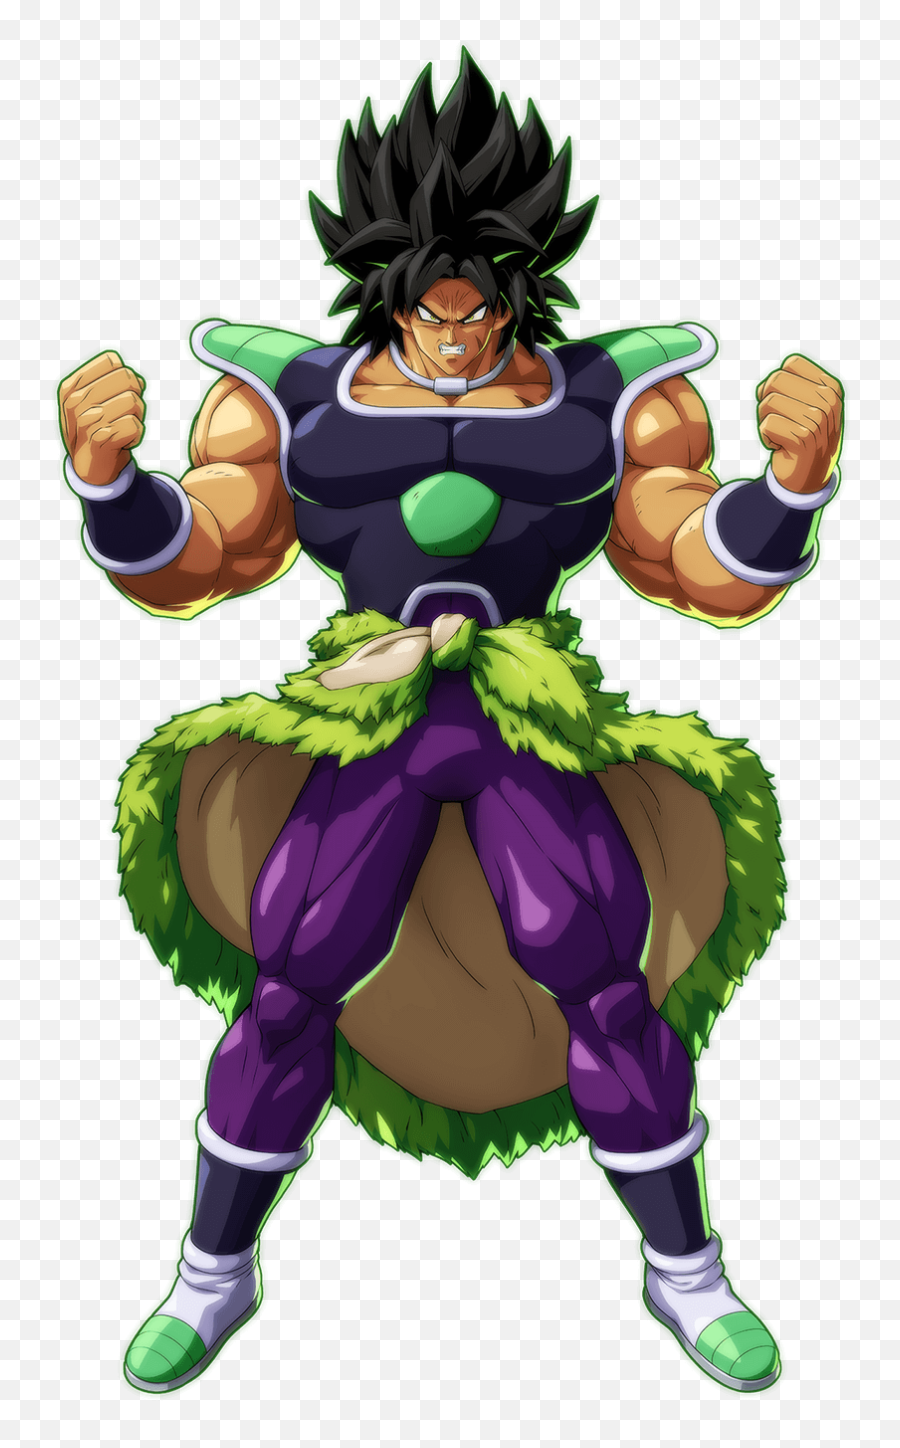 Broly - Broly Dragon Ball Fighterz Png,Dragon Ball Fighterz Png